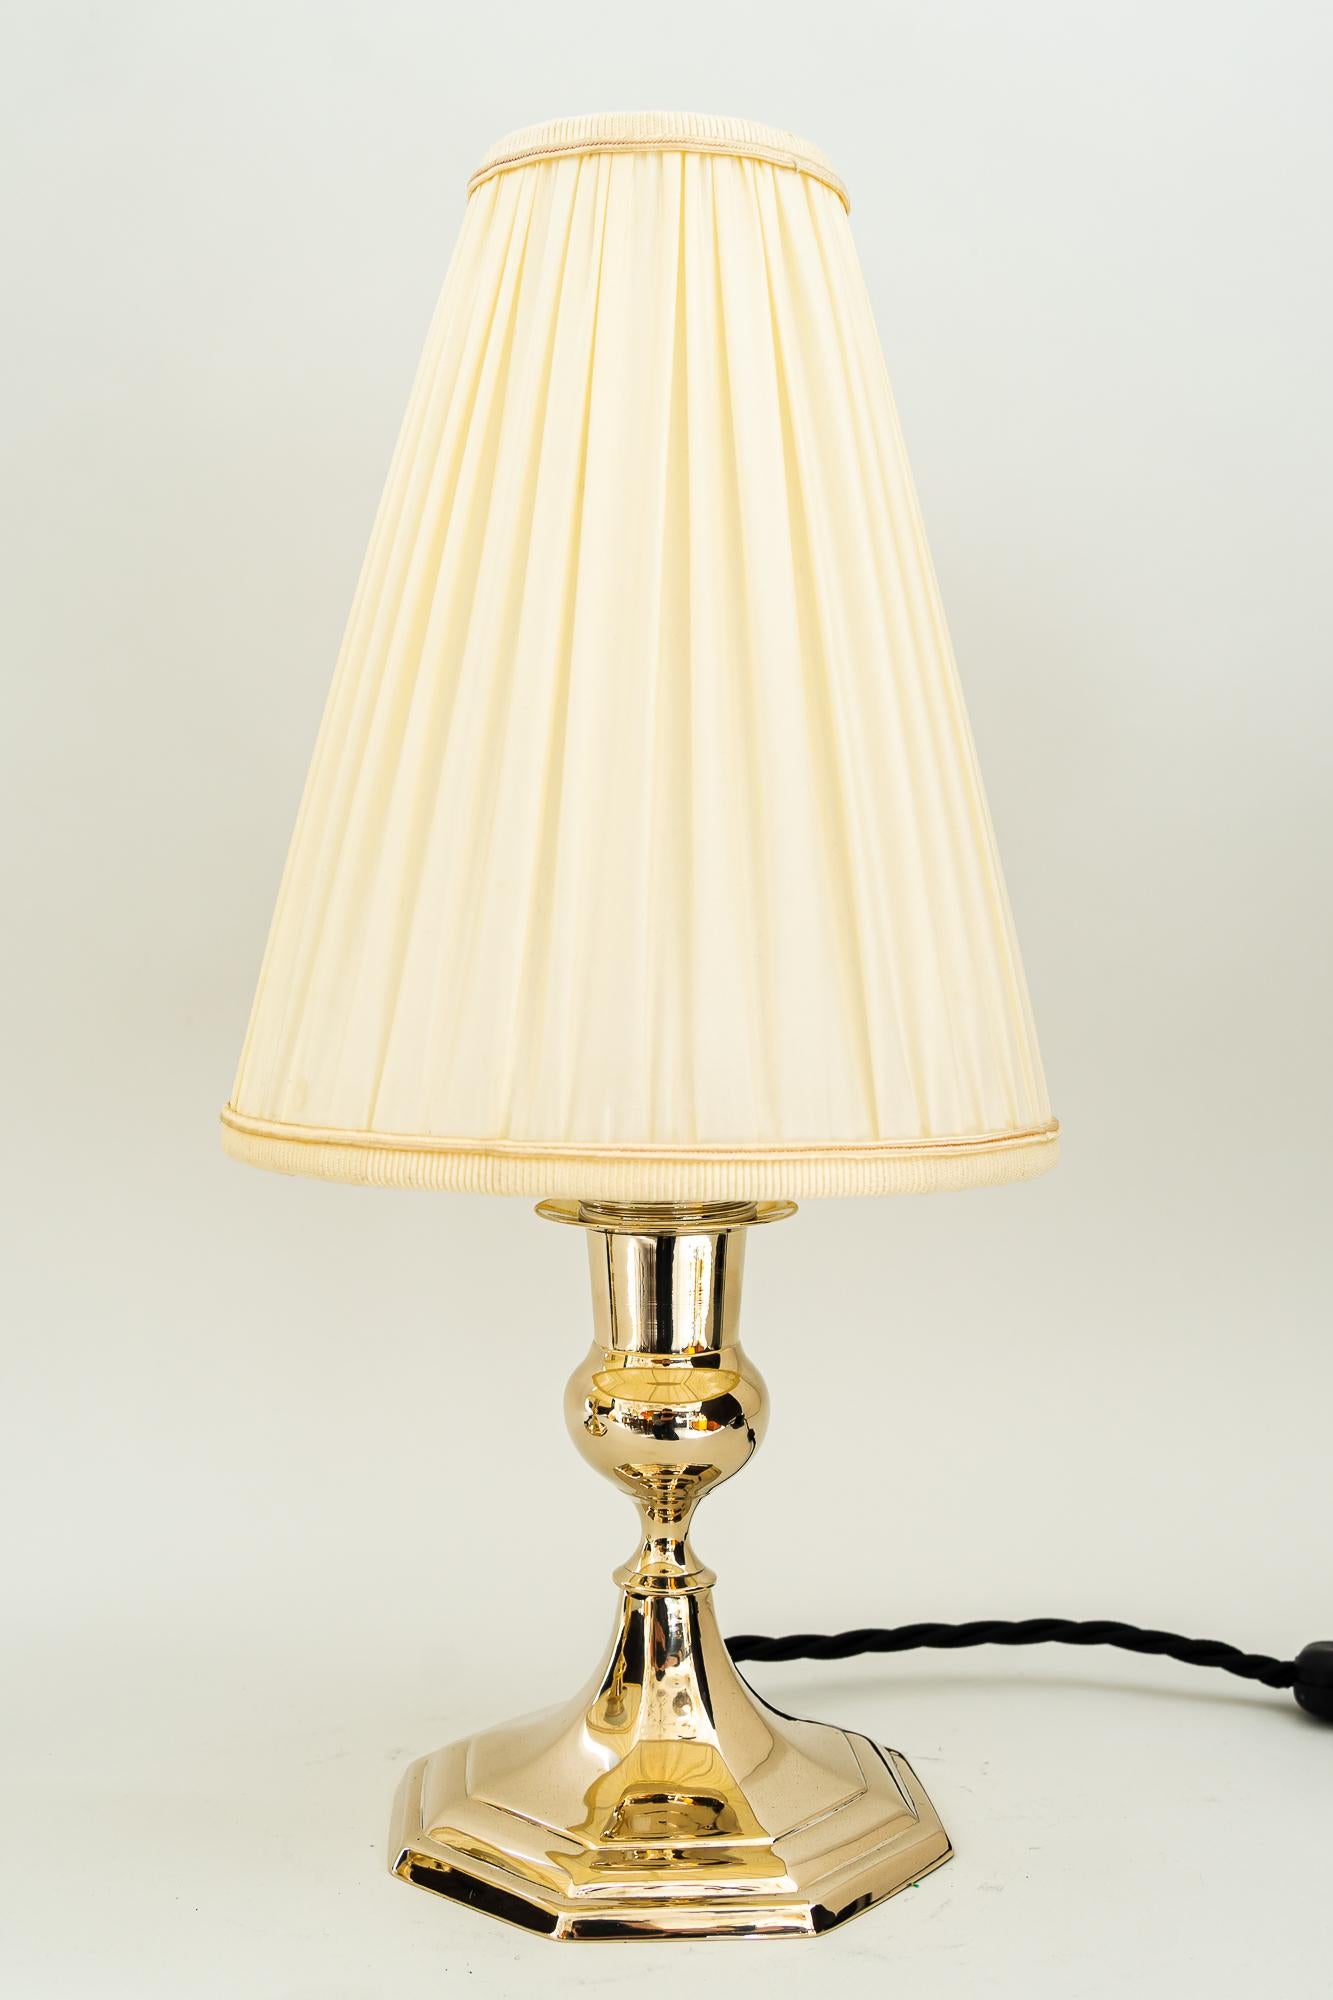 2 Art Deco table lamps with fabric shades, vienna around 1920s 
The shades are replaced (new).
Alpaca.
The socket is brass (nickel-plated).